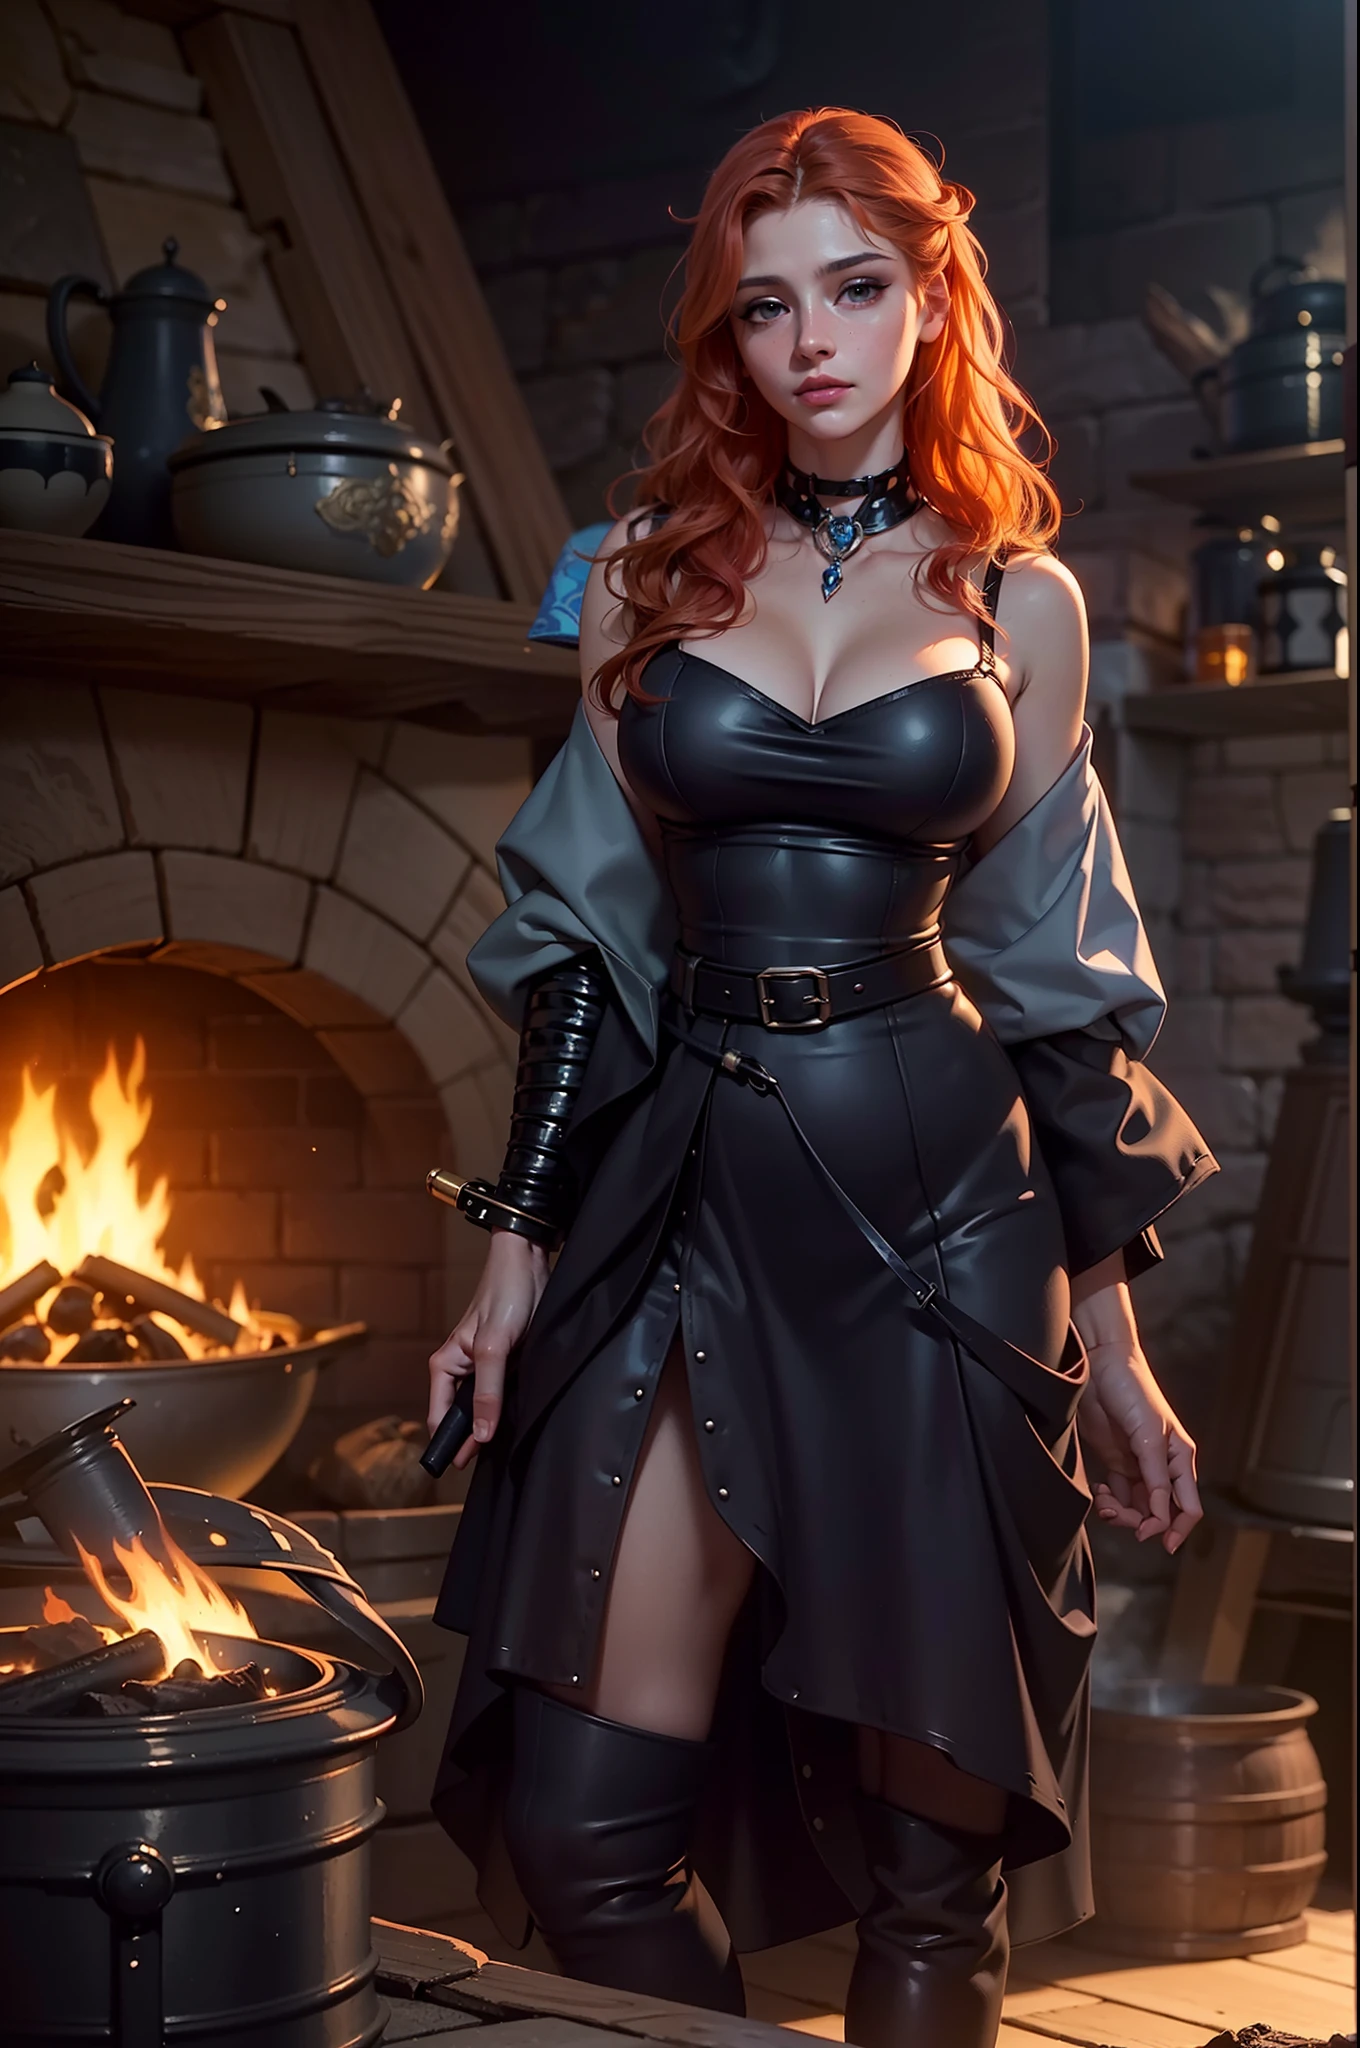 high details, best quality, 16k, RAW, [best detailed], masterpiece, best quality, (extremely detailed), full body (best details, Masterpiece, best quality), , ultra wide shot, photorealistic, fantasy art, RPG art, D&D art, a picture of a woman, witch brweing dark matter over big cauldron in the fire place, middle aged woman  (best details, Masterpiece, best quality), exquisite beautiful woman (best details, Masterpiece, best quality), ultra detailed face (best details, Masterpiece, best quality), evil grin, red hair, long hair, wavy hair, dynamic eye color, pale skin, black dress (best details, Masterpiece, best quality) NeroV2, wearing black boots, large boilng cauldron, NeroV2 black cauldron, green mists, coming from cauldron, a stove, middles ages house background, dim fire light, High Detail, Ultra High Quality, High Resolution, 16K Resolution, Ultra HD Pictures, 3D rendering Ultra Realistic, Clear Details, Realistic Detail, Ultra High Definition Waiting to start